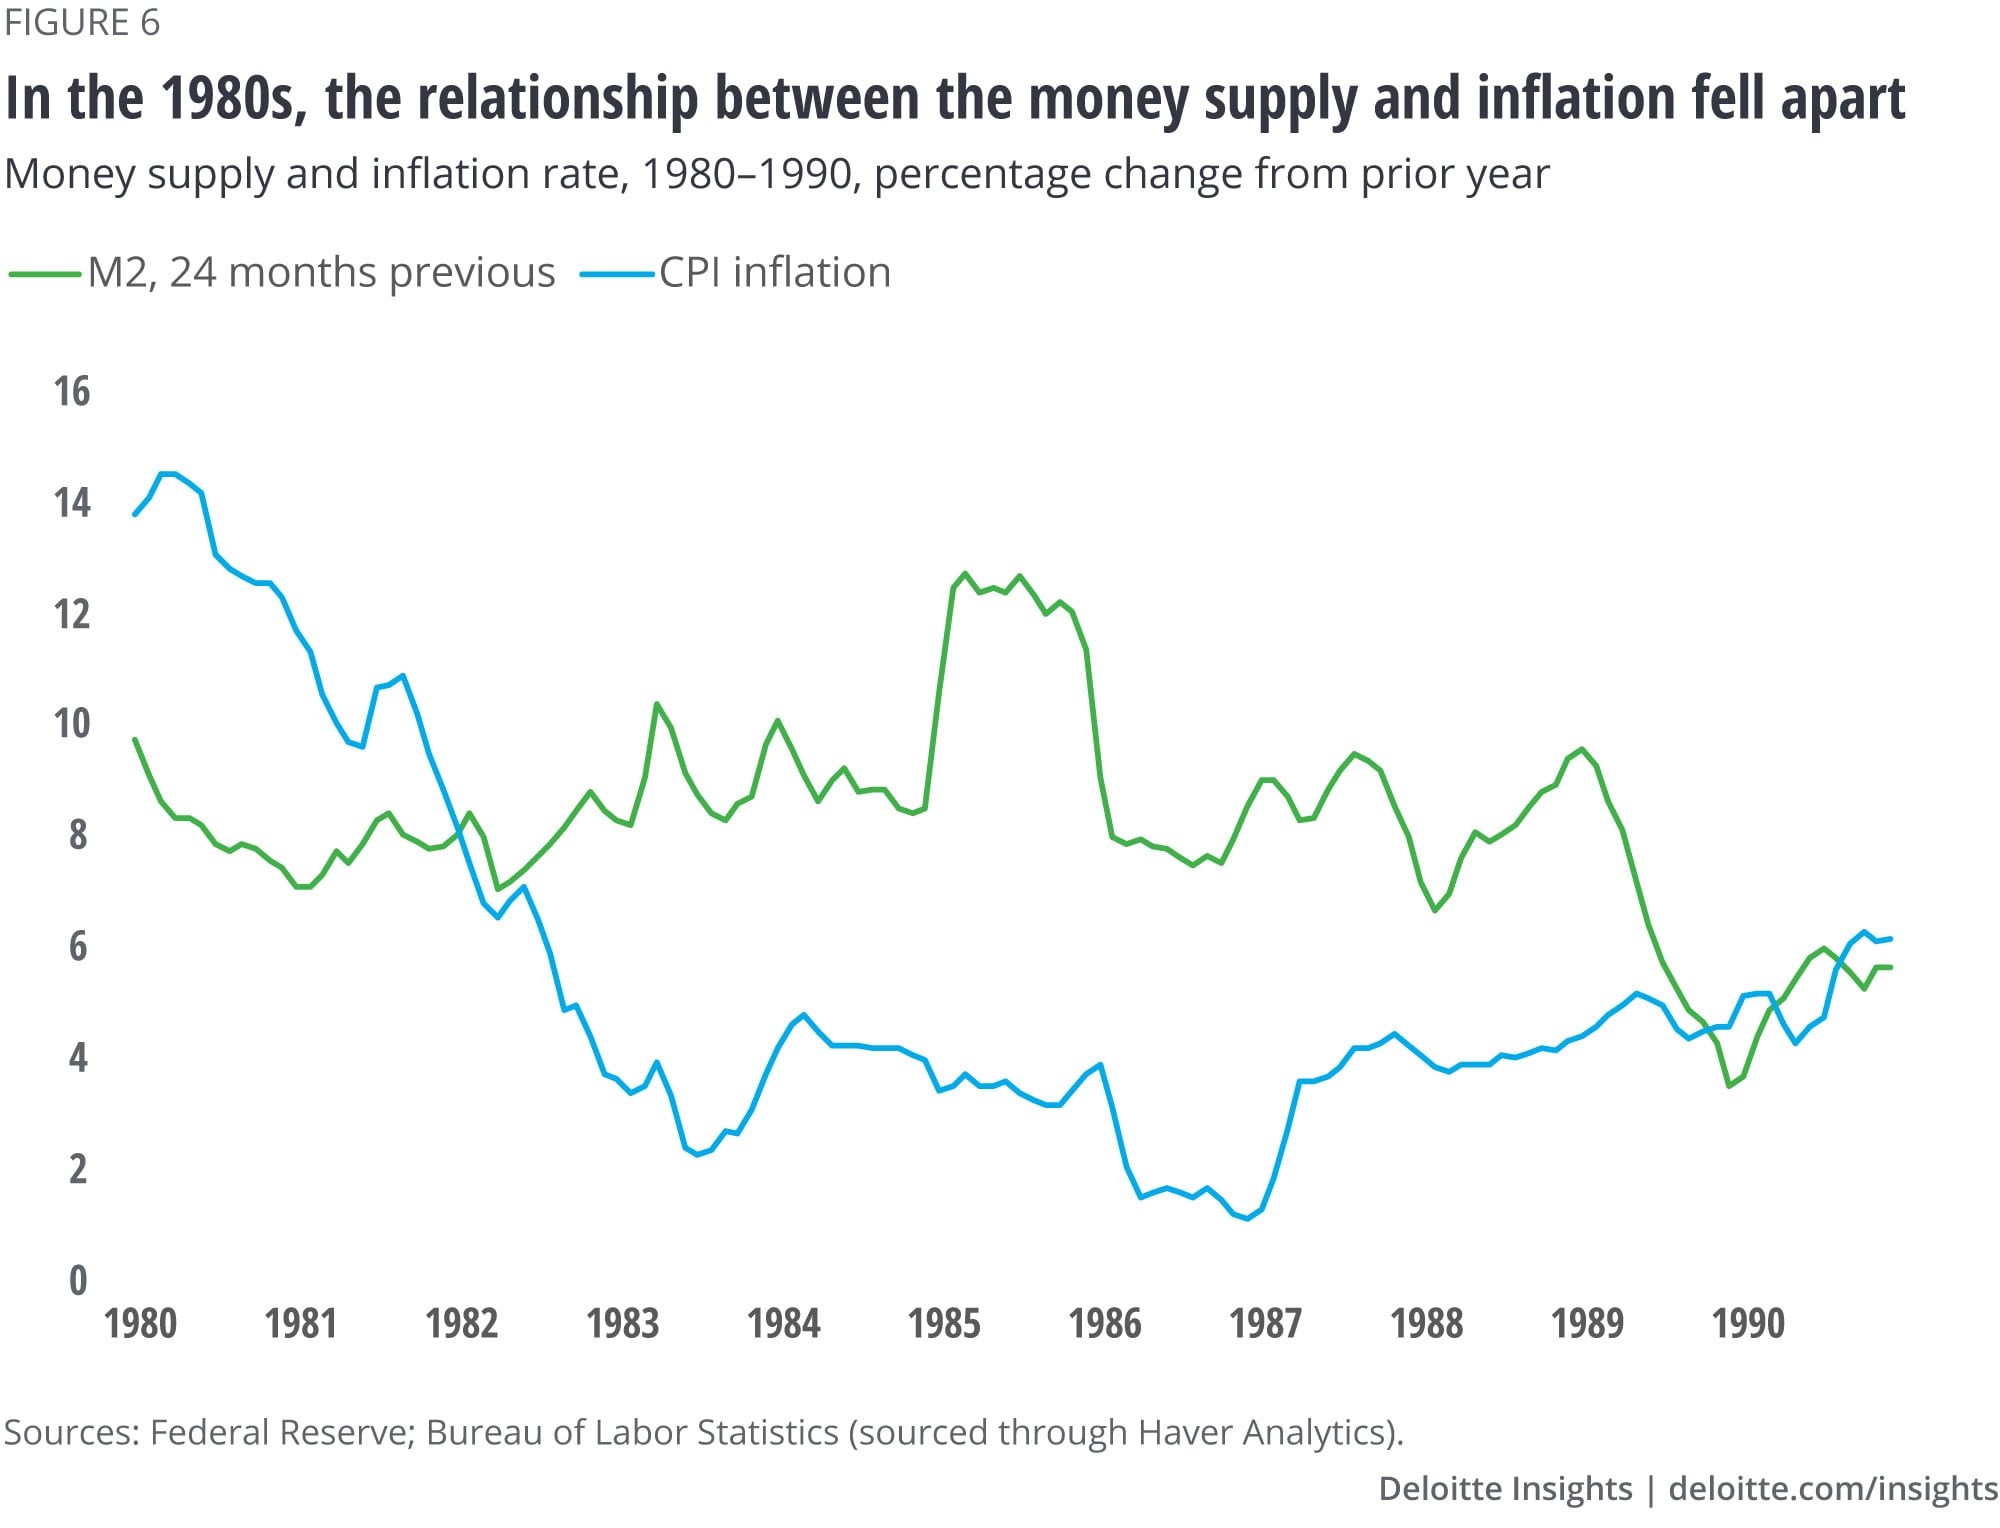 In the 1980s, the relationship between the money supply and inflation fell apart